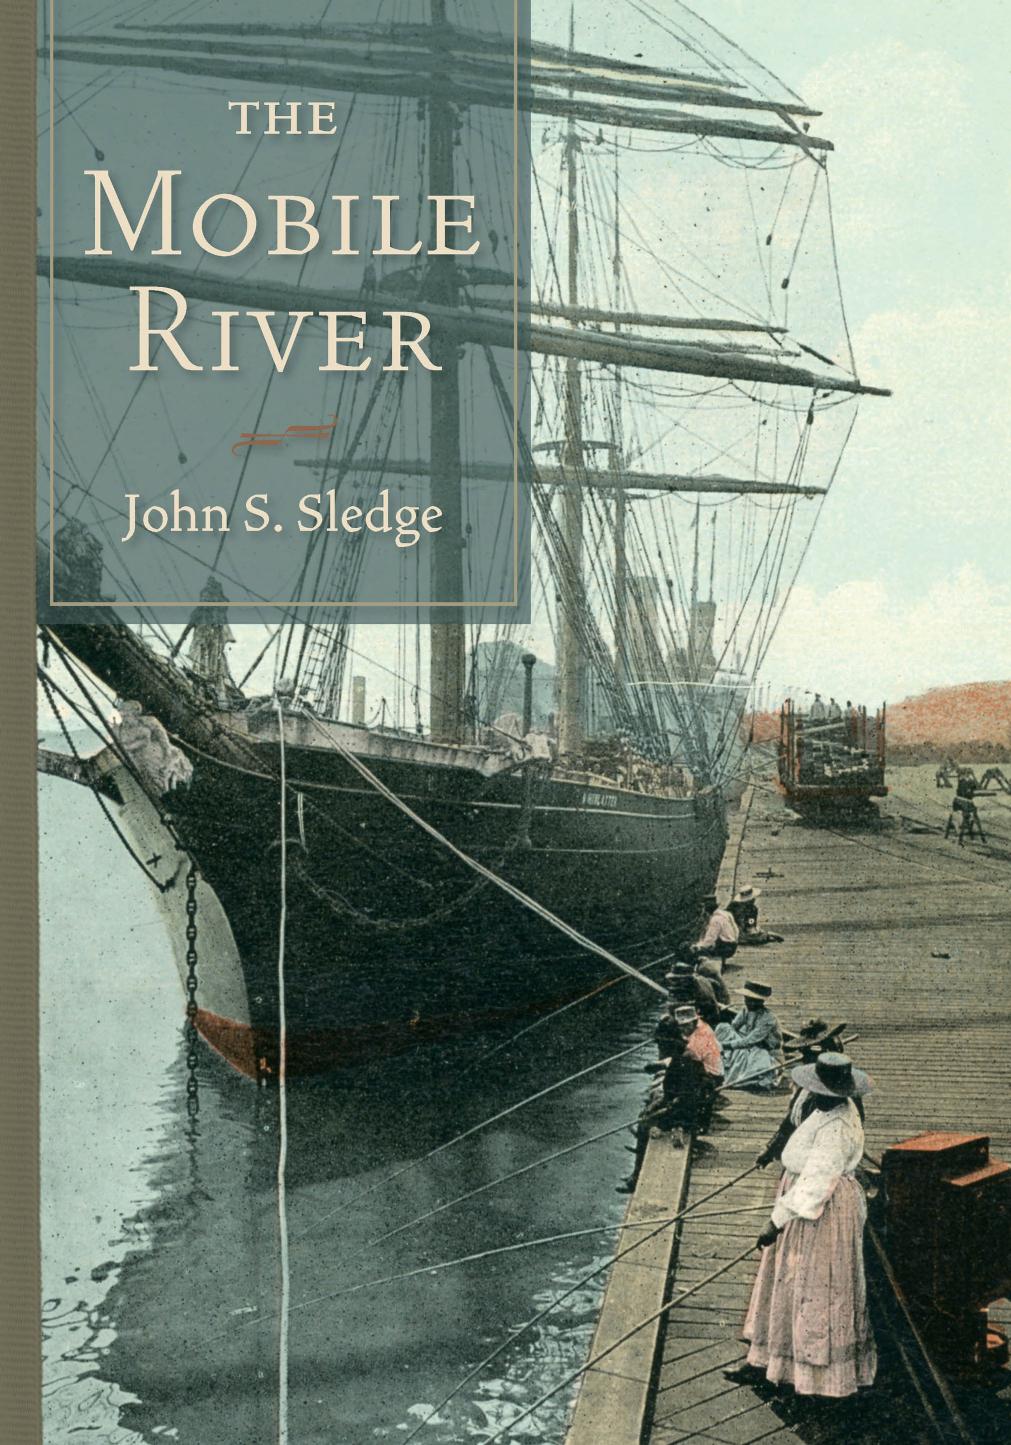 The Mobile River by John S. Sledge